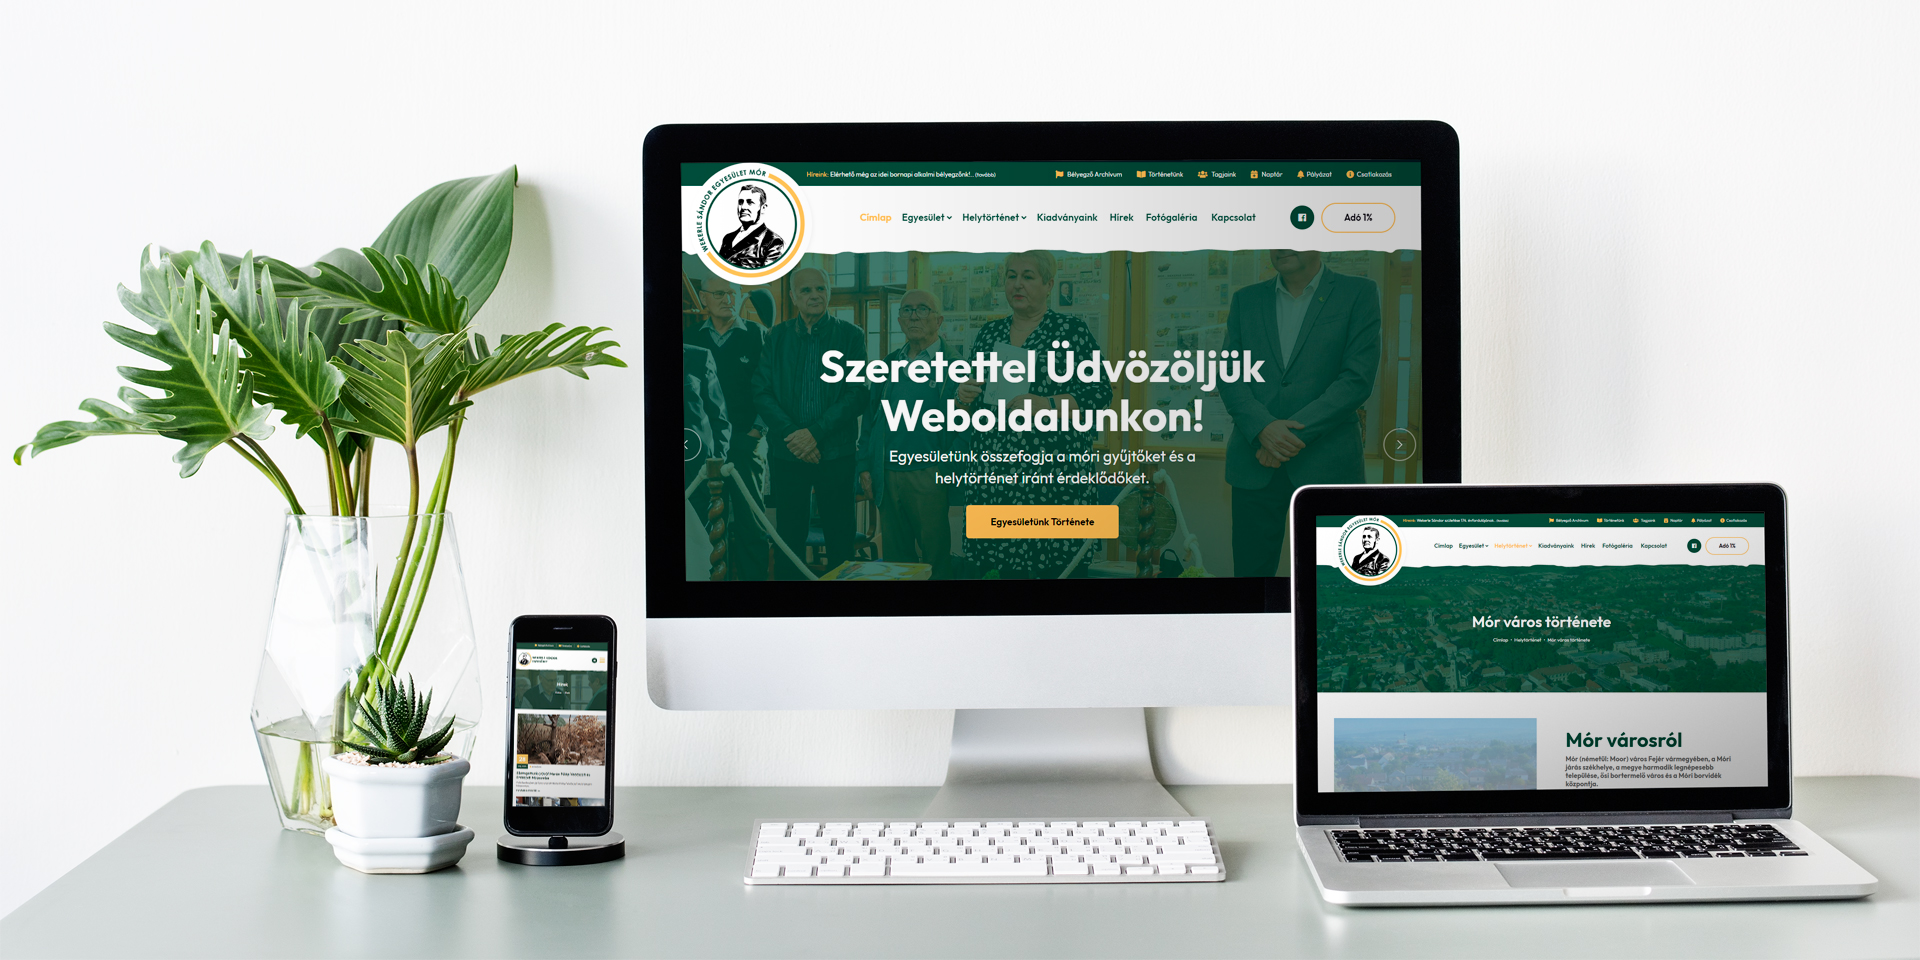 The website of the Sándor Wekerle Association has been completed